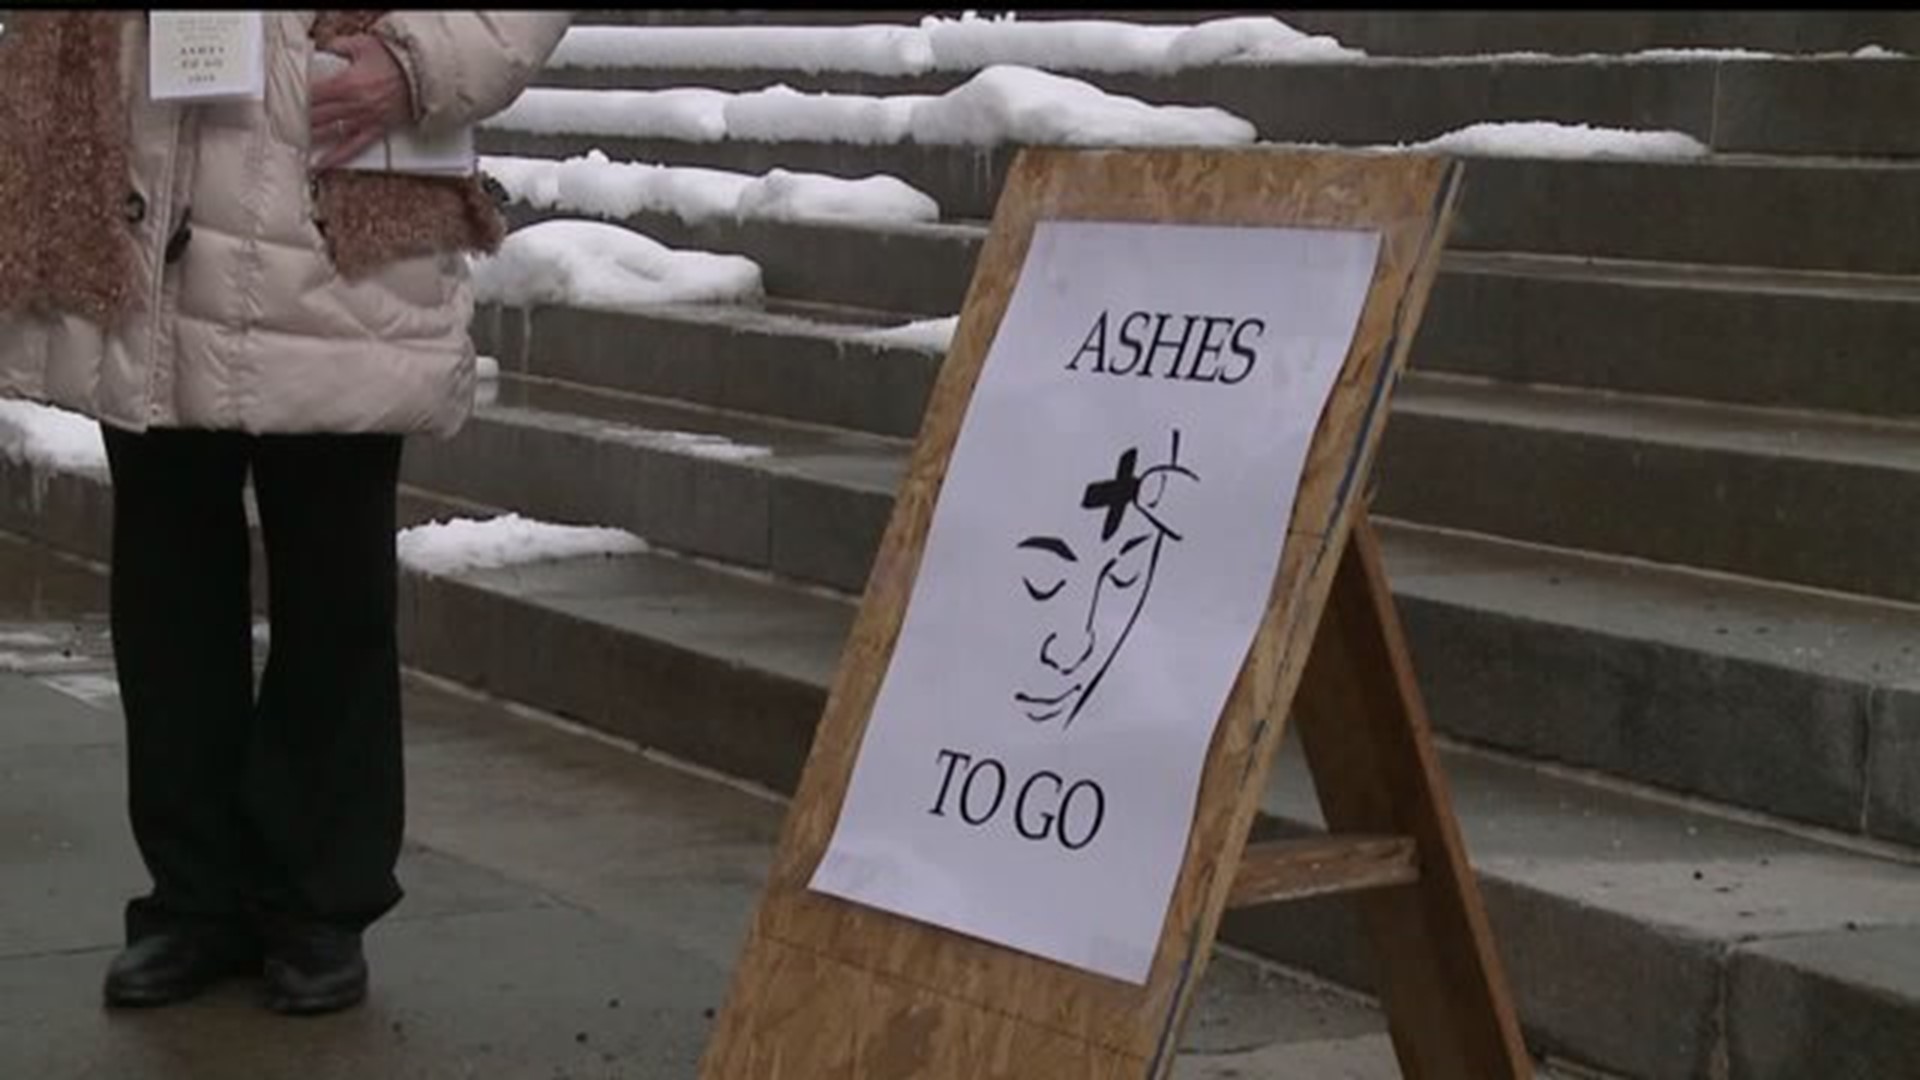 Ashes to go